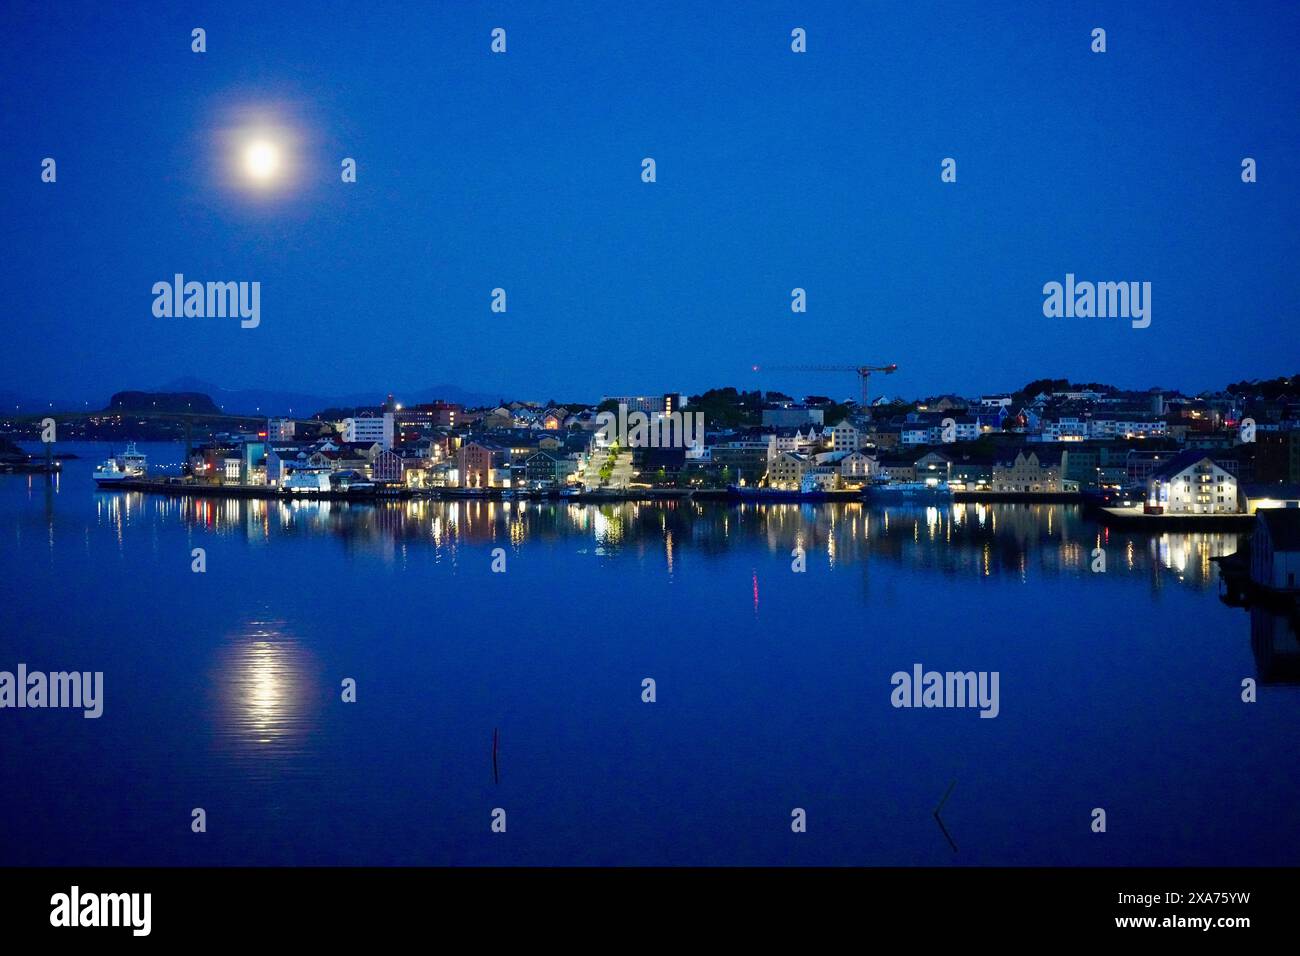 A nighttime view of the inner harbor of the city of Kristiansund, Norway. Stock Photo